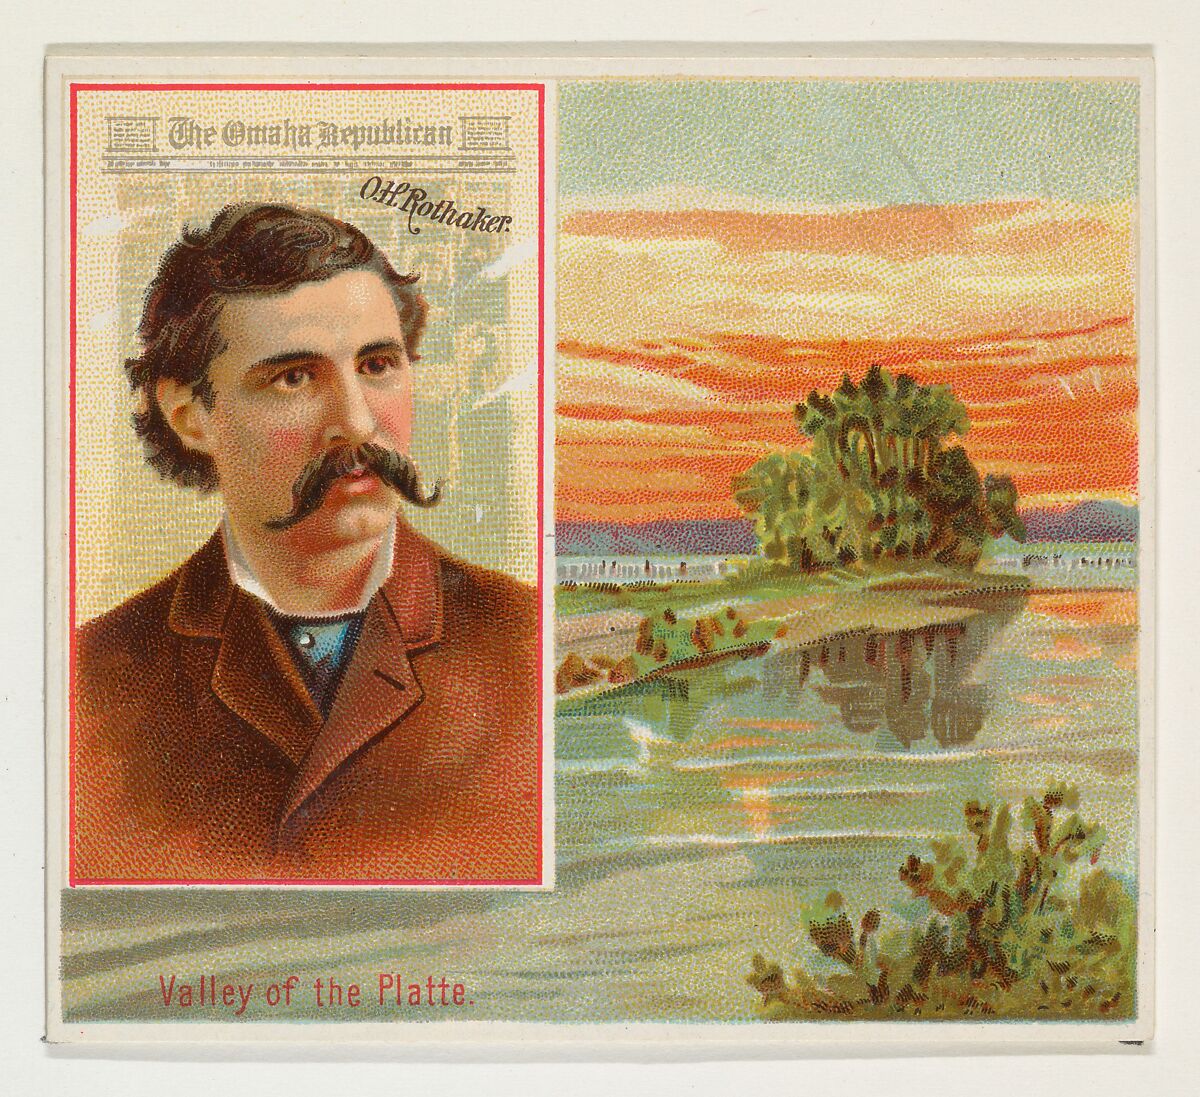 O.H. Rothaker, The Omaha Republican, from the American Editors series (N35) for Allen & Ginter Cigarettes, Issued by Allen &amp; Ginter (American, Richmond, Virginia), Commercial color lithograph 